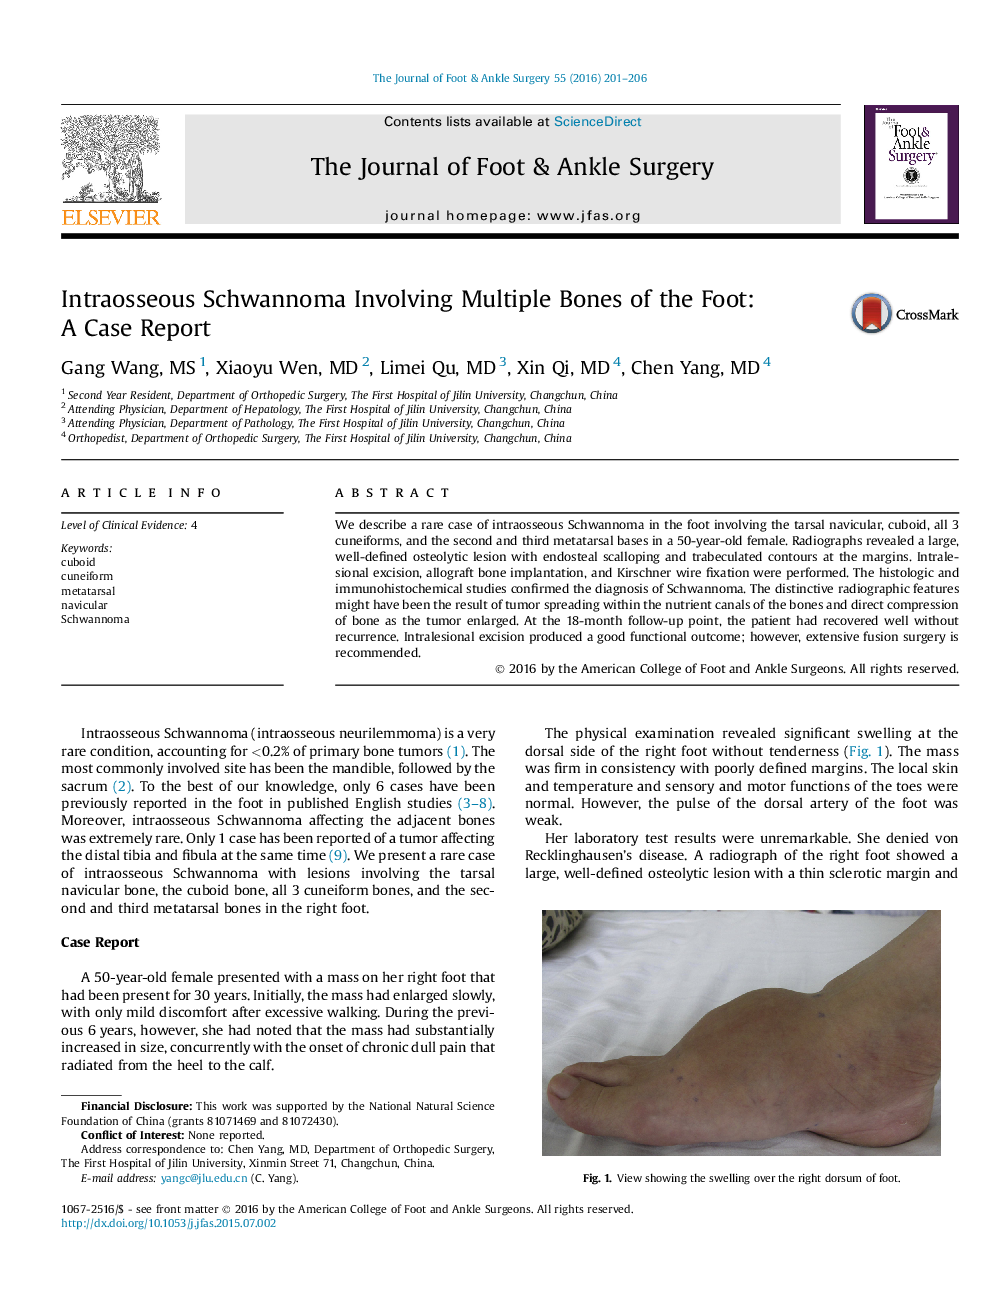 Intraosseous Schwannoma Involving Multiple Bones of the Foot: A Case Report 